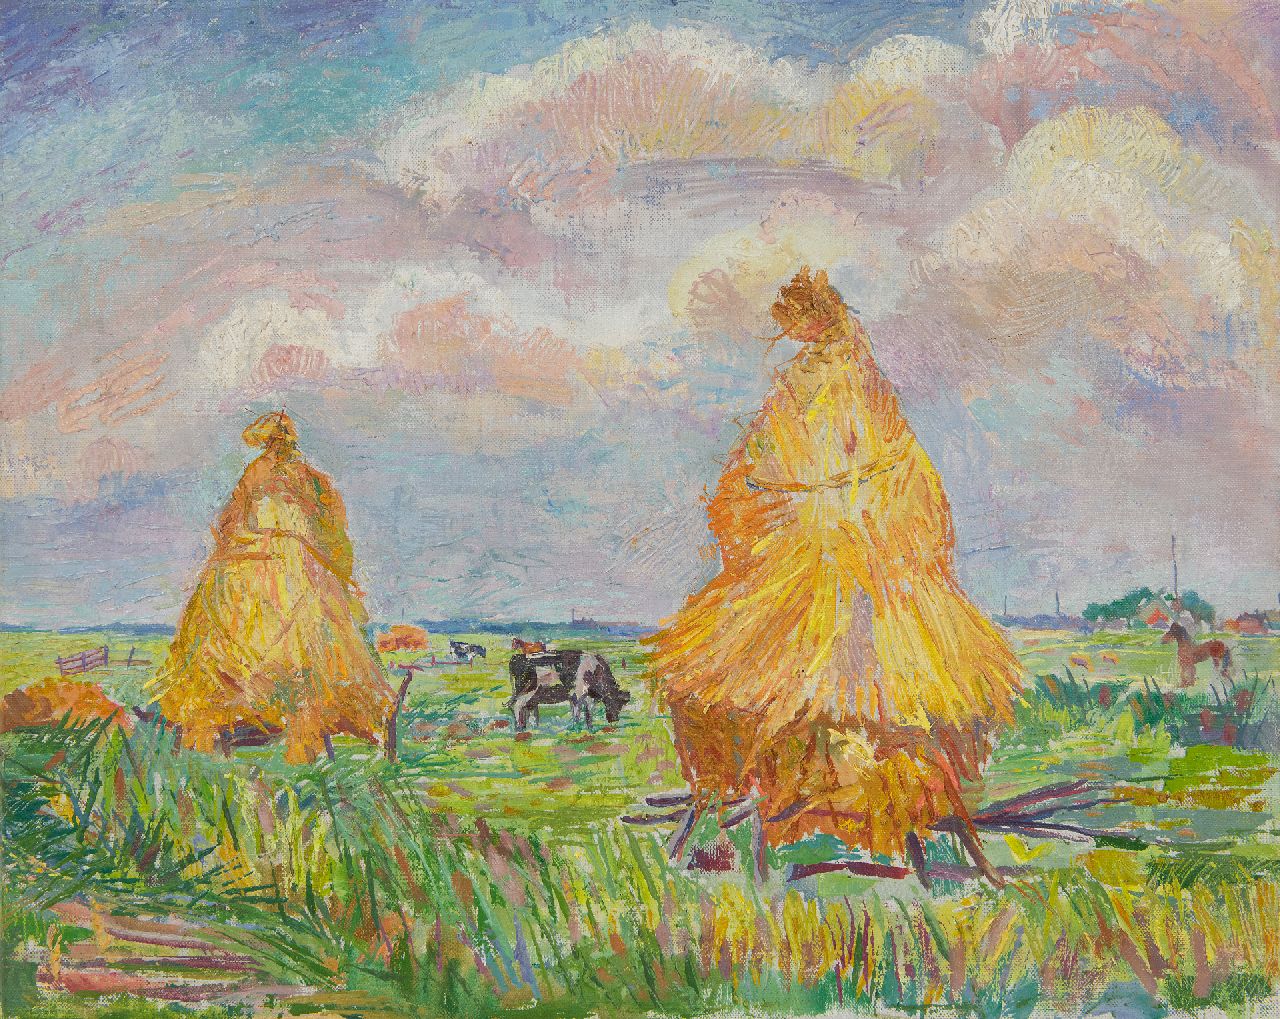 Pijpers E.E.  | 'Edith' Elizabeth Pijpers, Haystacks in a field, oil on canvas 36.9 x 45.8 cm